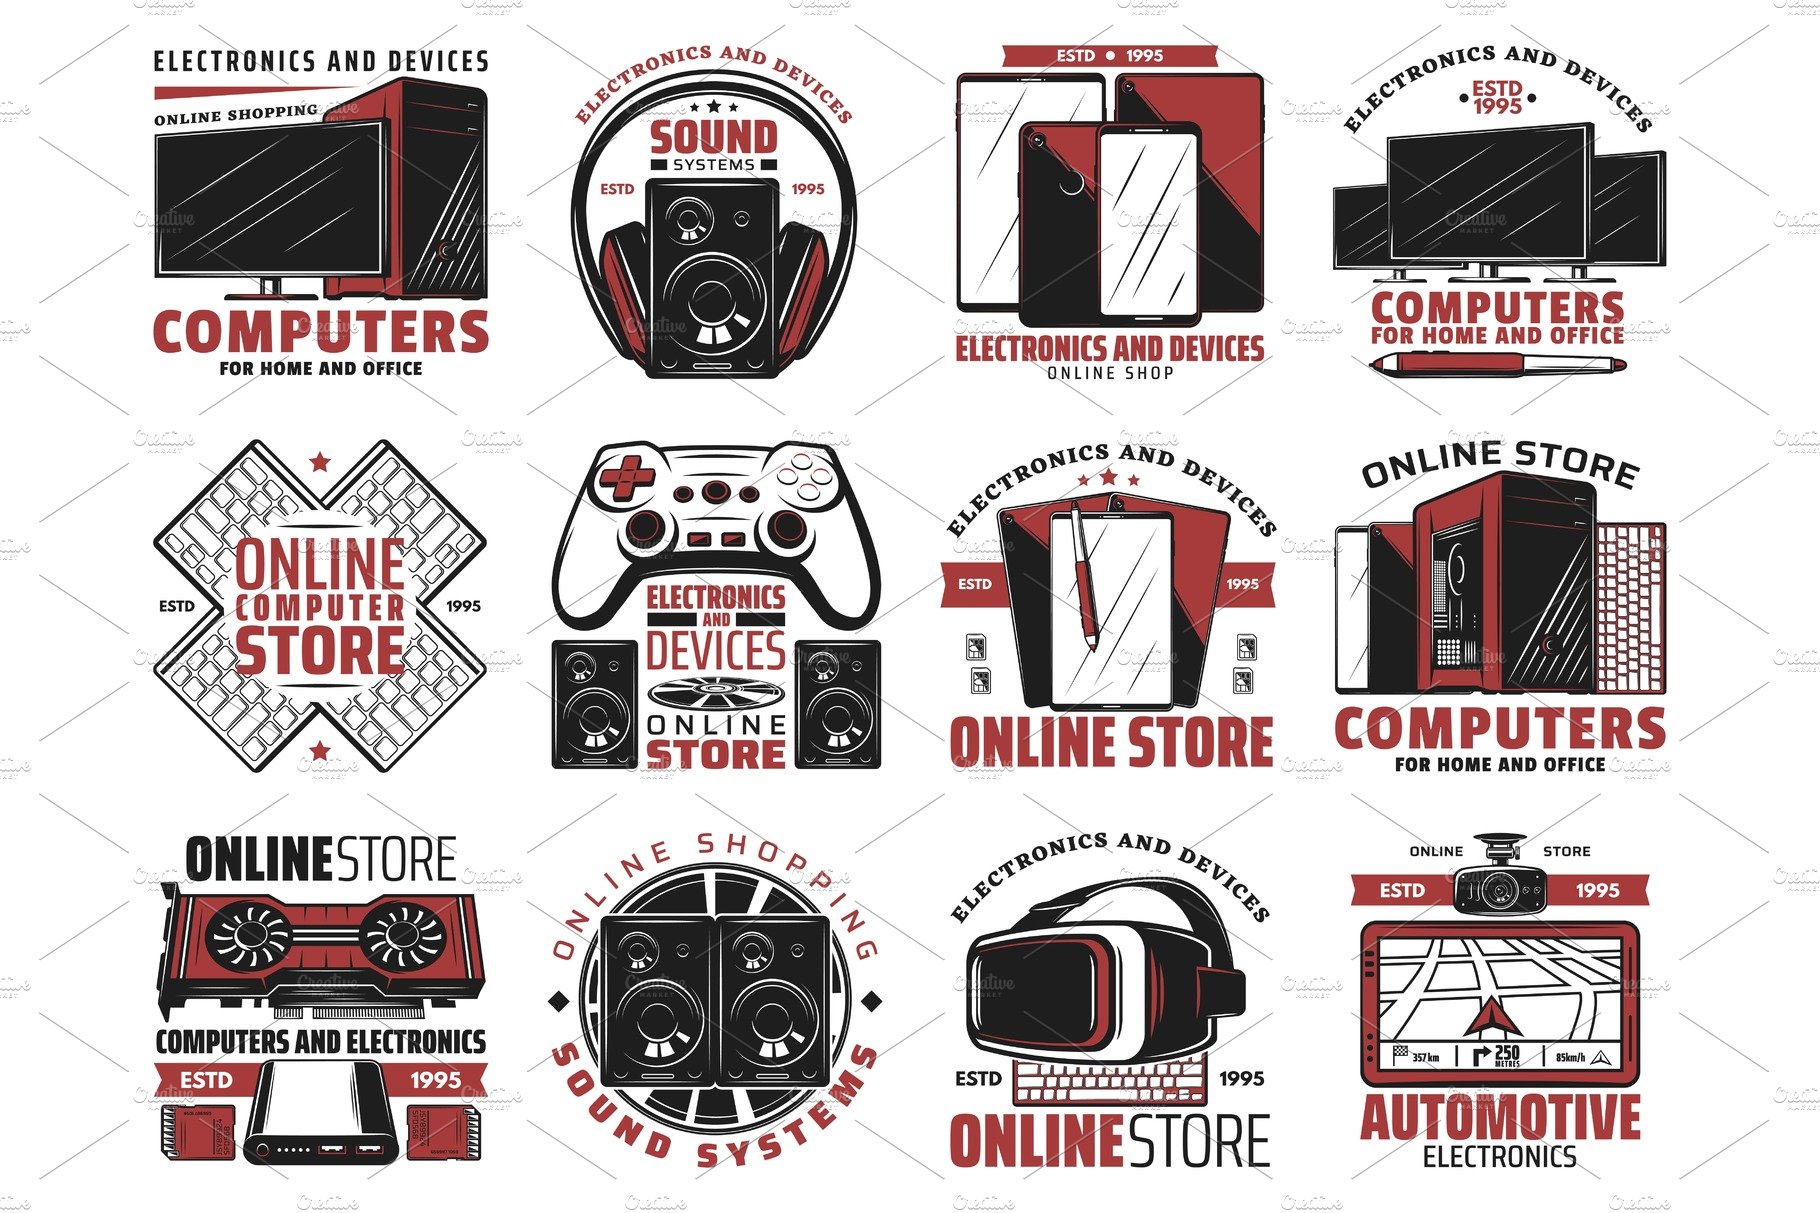 Technology store devices icons cover image.